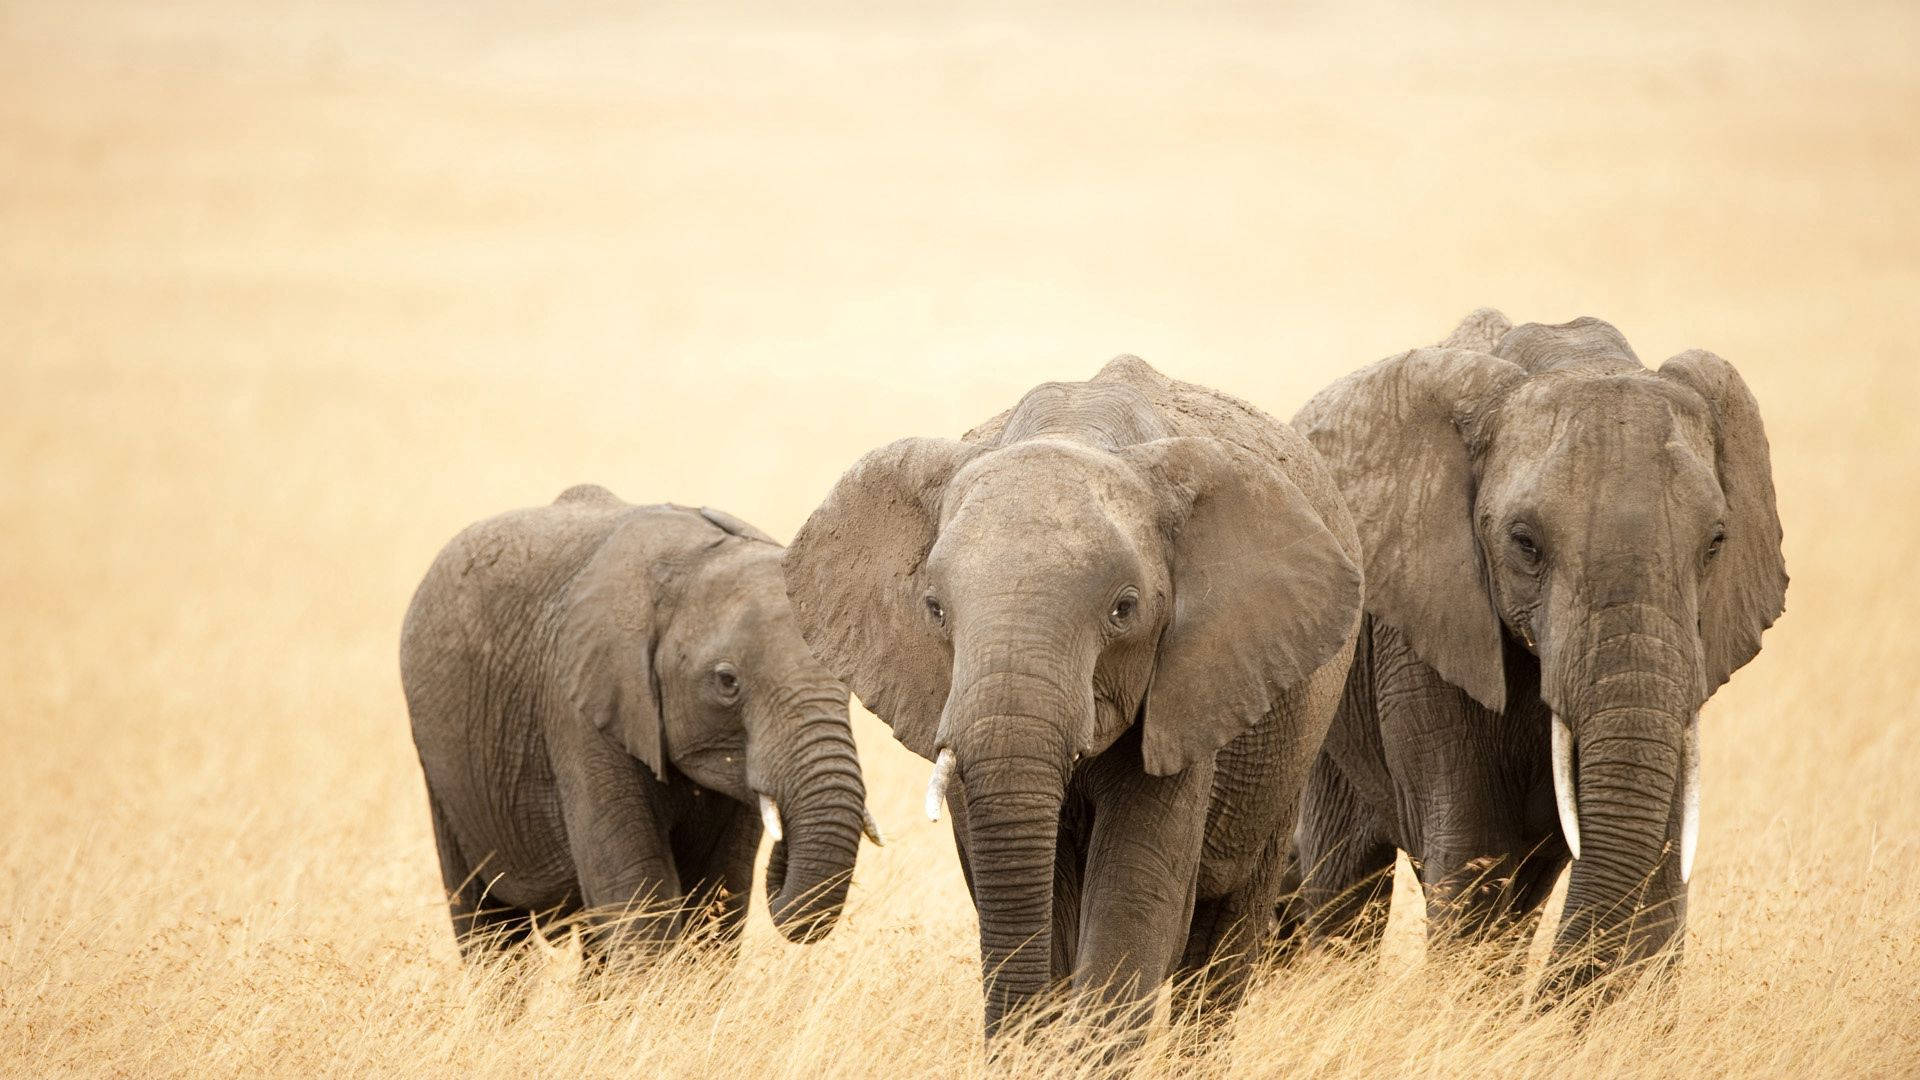 Elephant Family Roaming In A Grassy Field Background